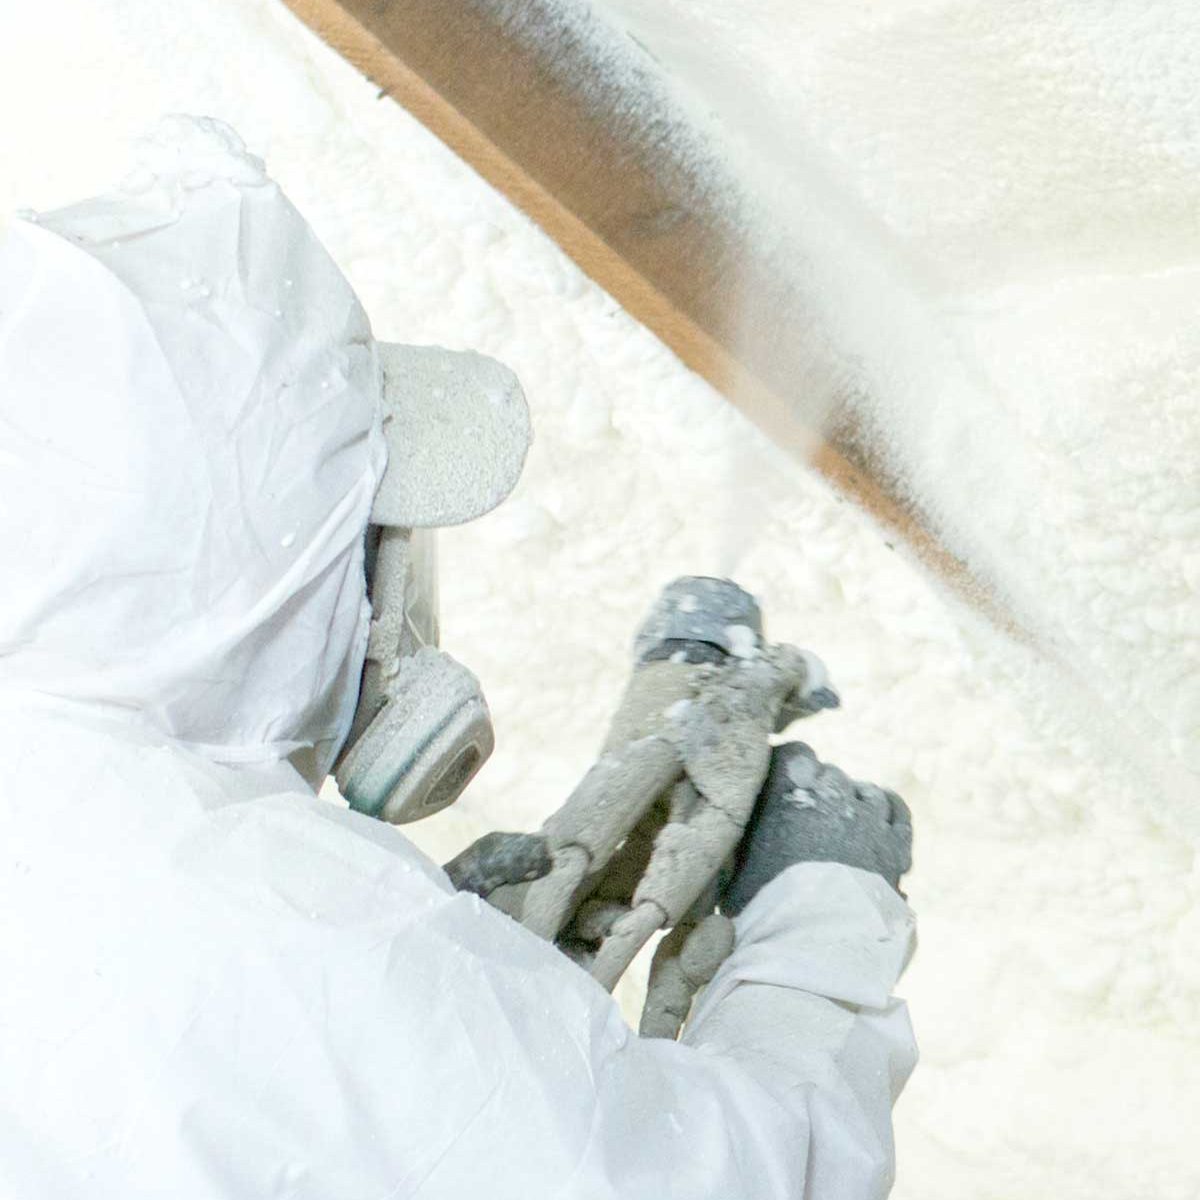 Who we are? Daddy spray insulation in Long Island New York